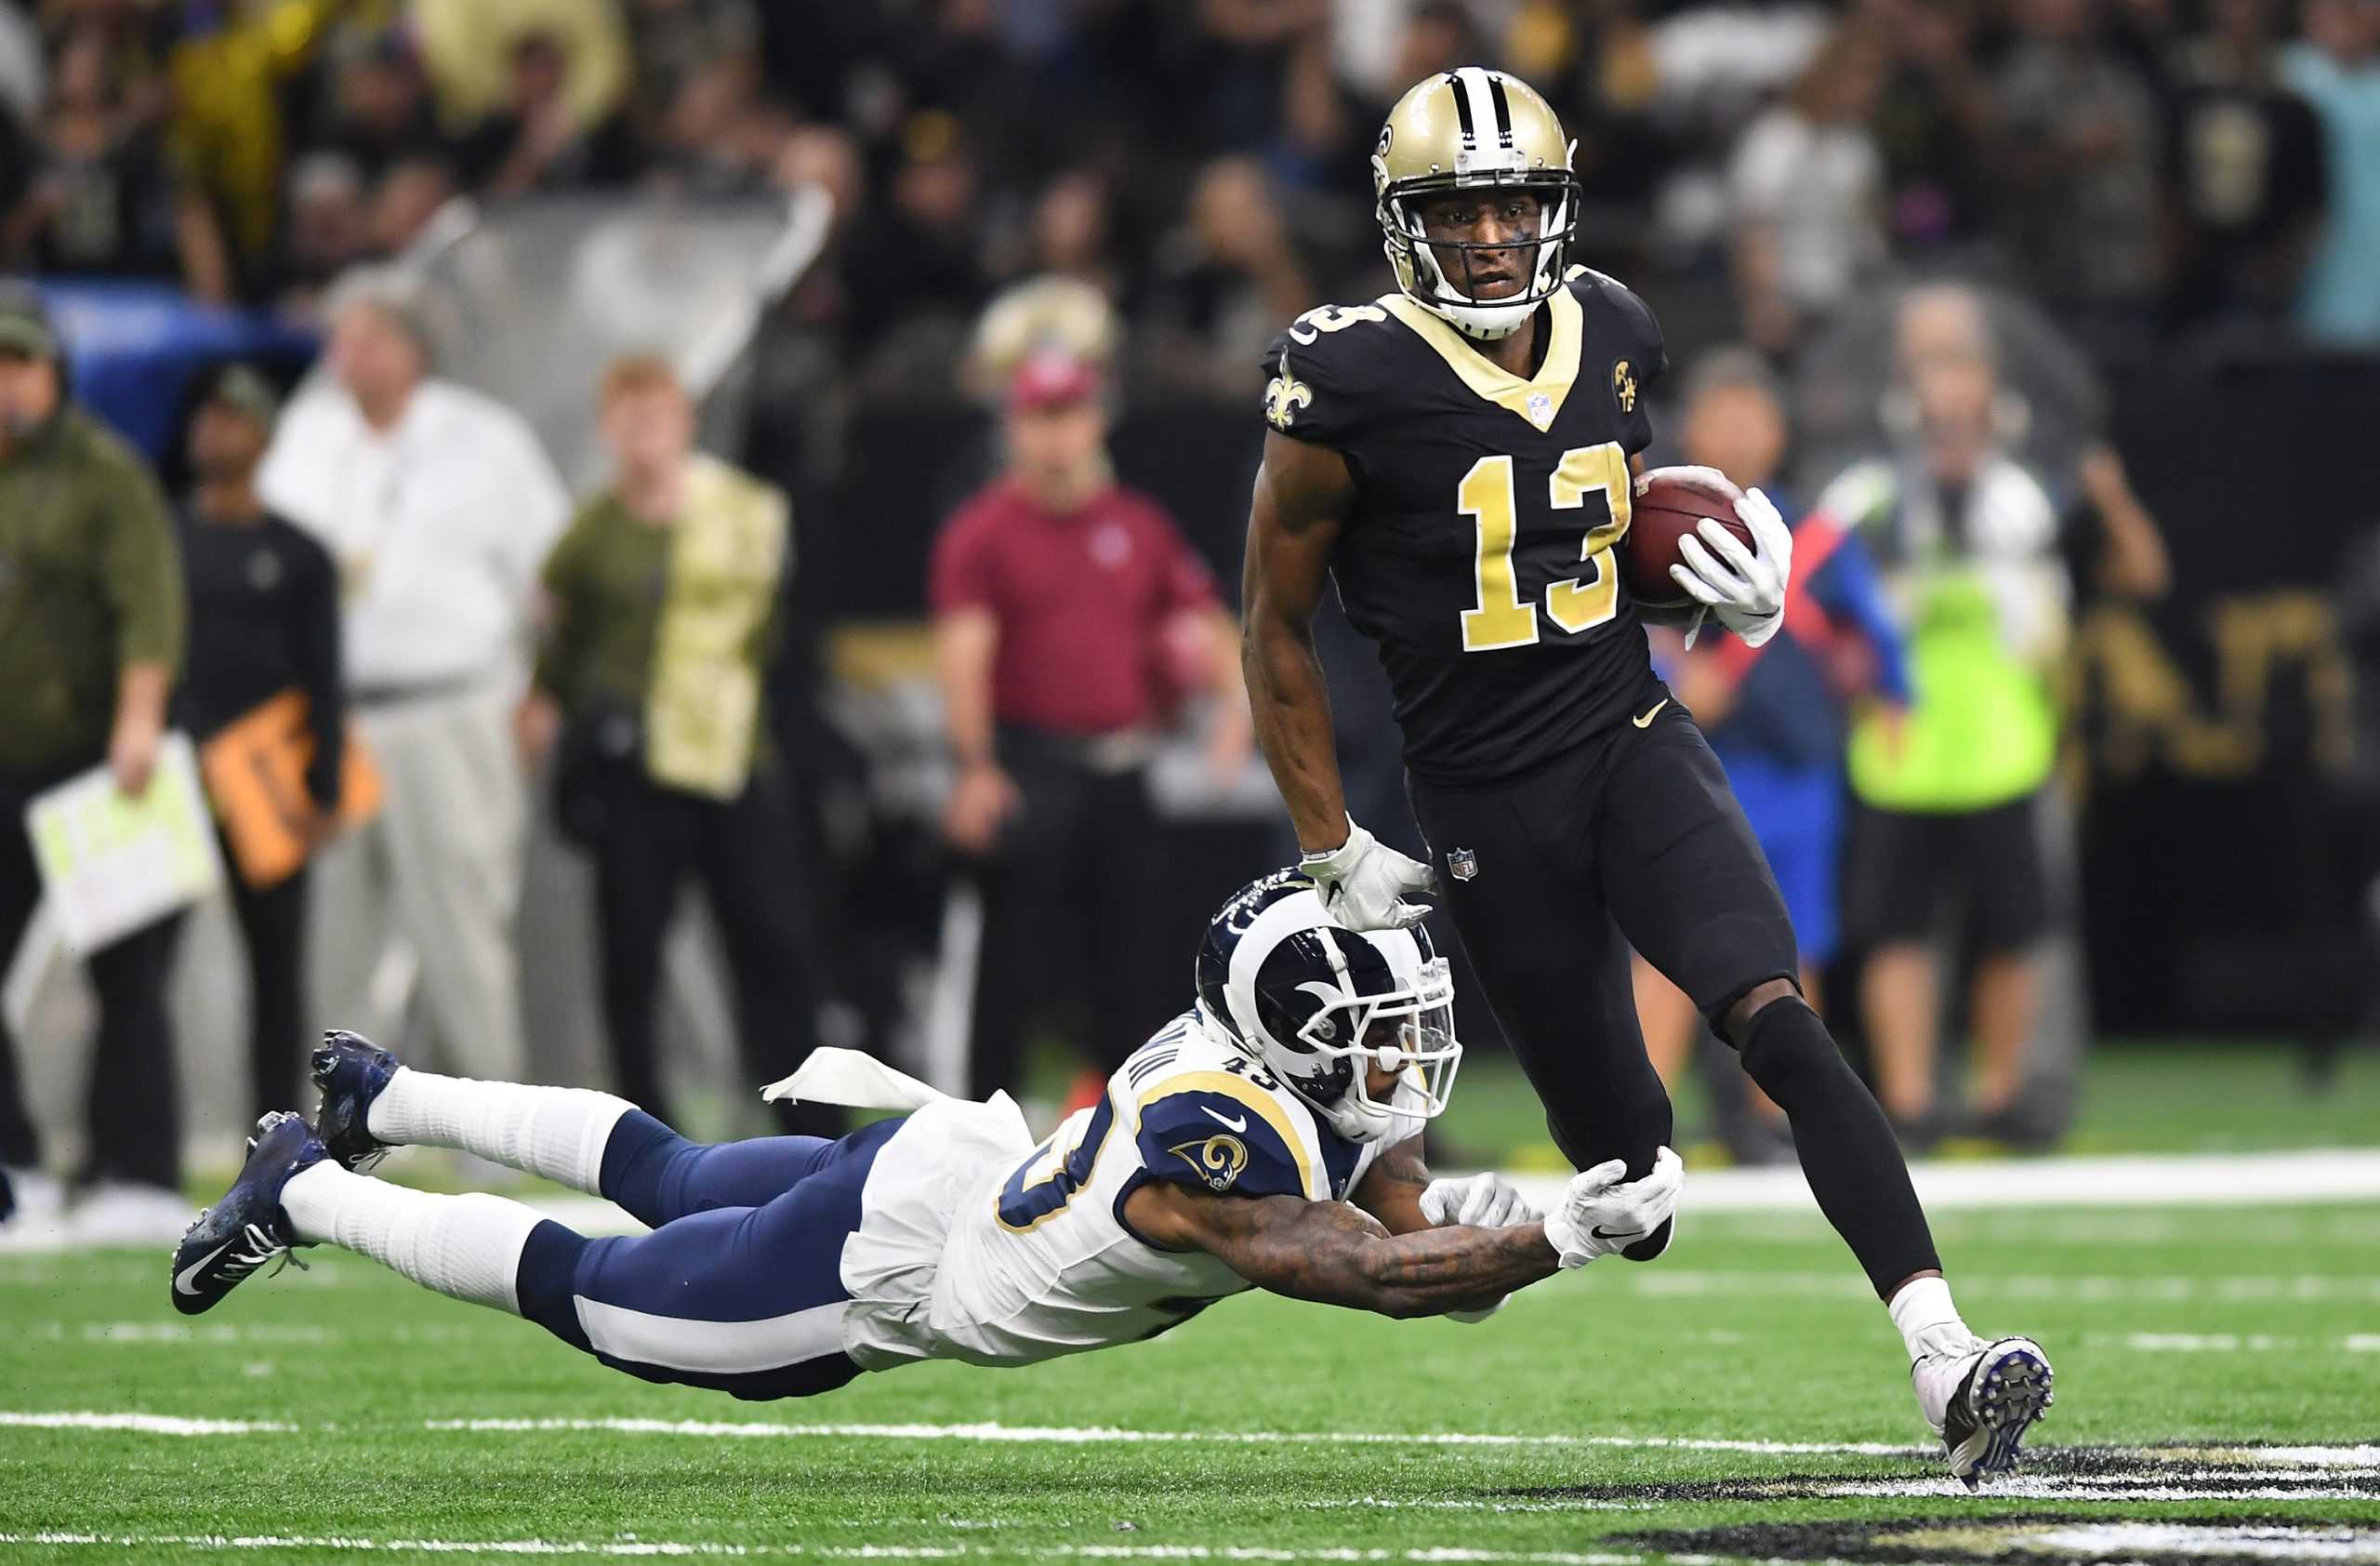 Los Angeles Rams safety John Johnson cant make the tackle on New Orleans Saints receiver Michael Thomas in the second quarter on Sunday, Nov. 4, 2018 at the Mercedes Benz Superdome in New Orleans, La. (Wally Skalij/Los Angeles Times/TNS)